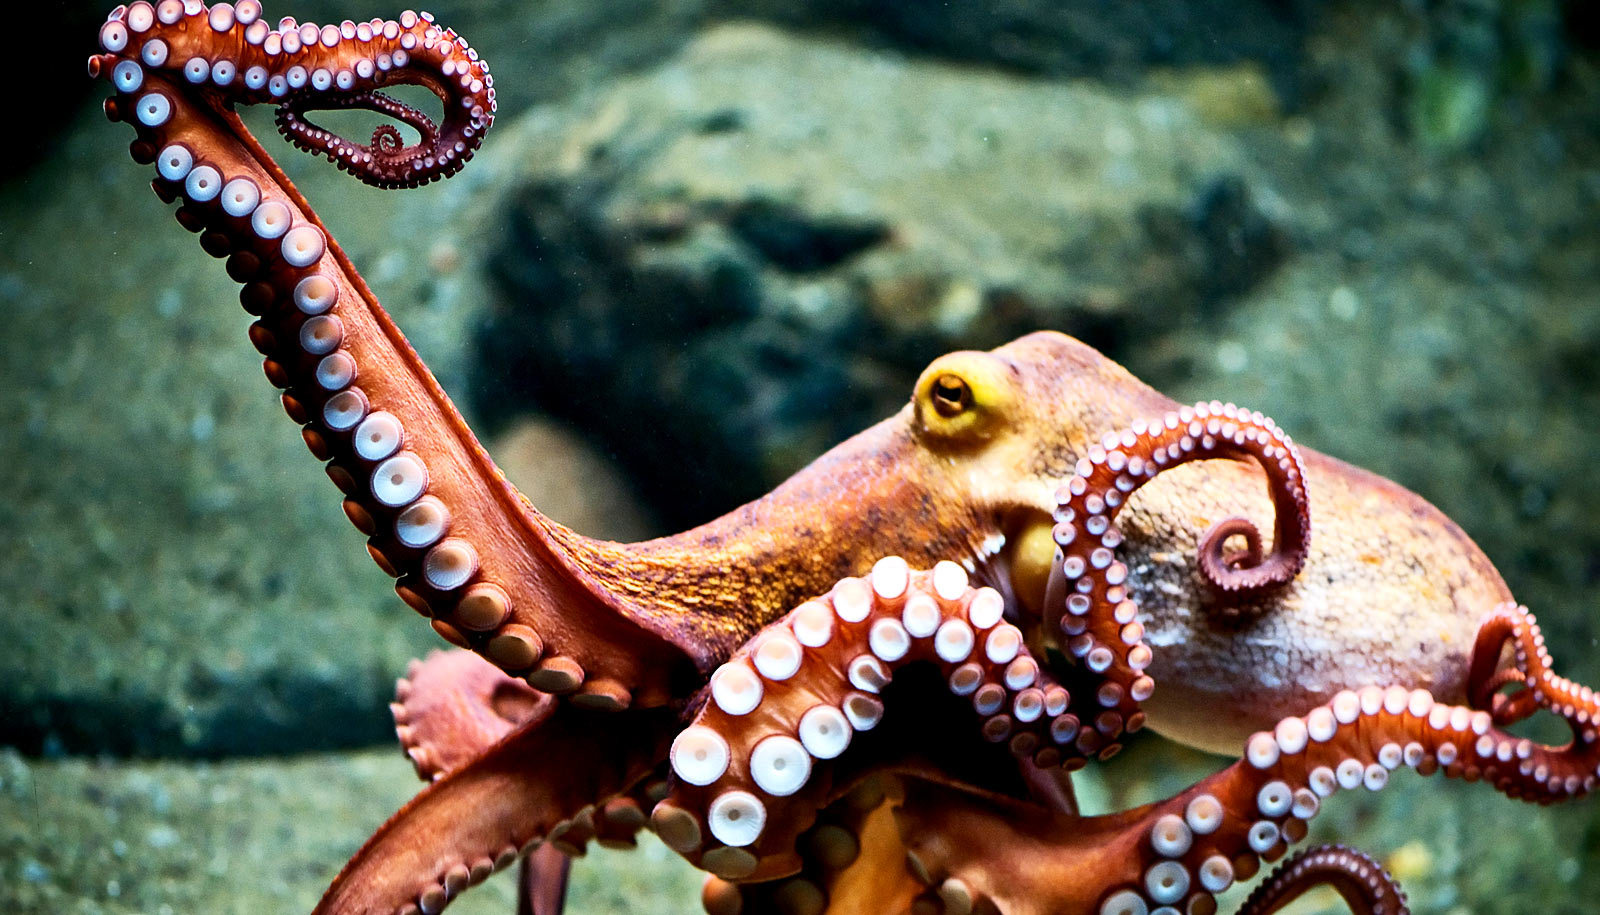 Octopus : The Octopus that led the way to Robotics